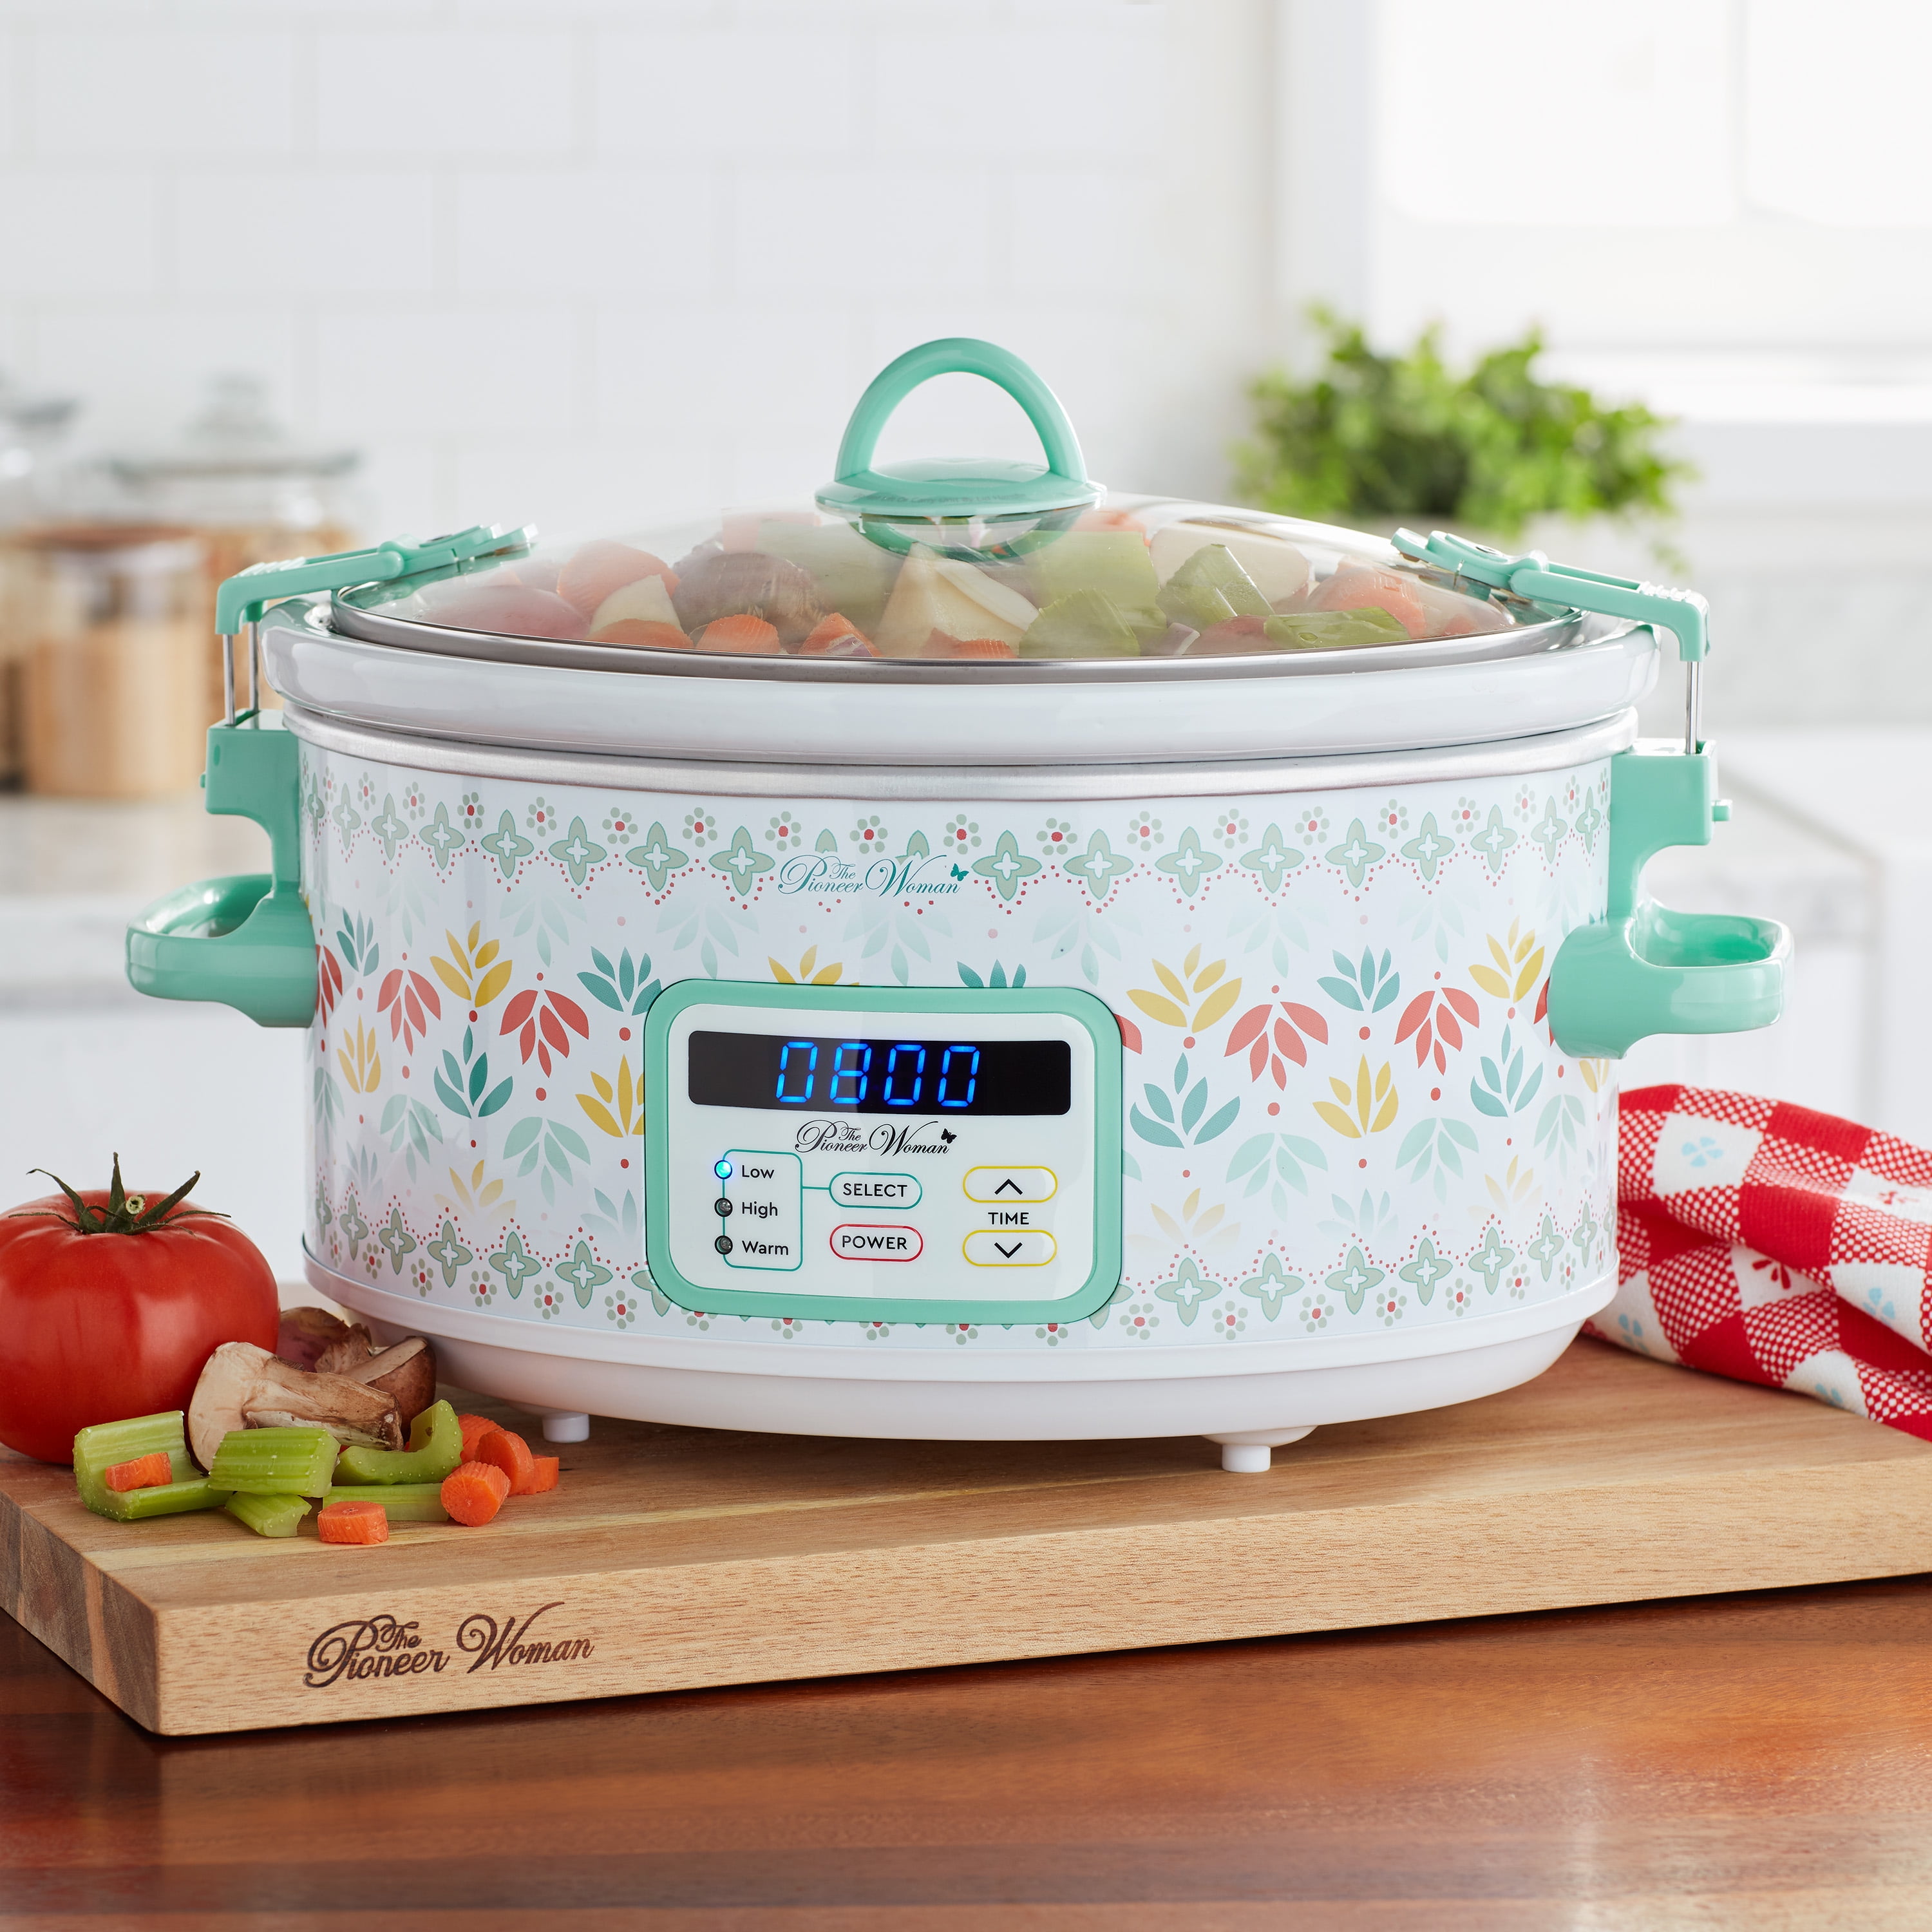 Pioneer Woman slow cookers on sale at Walmart — get two for less